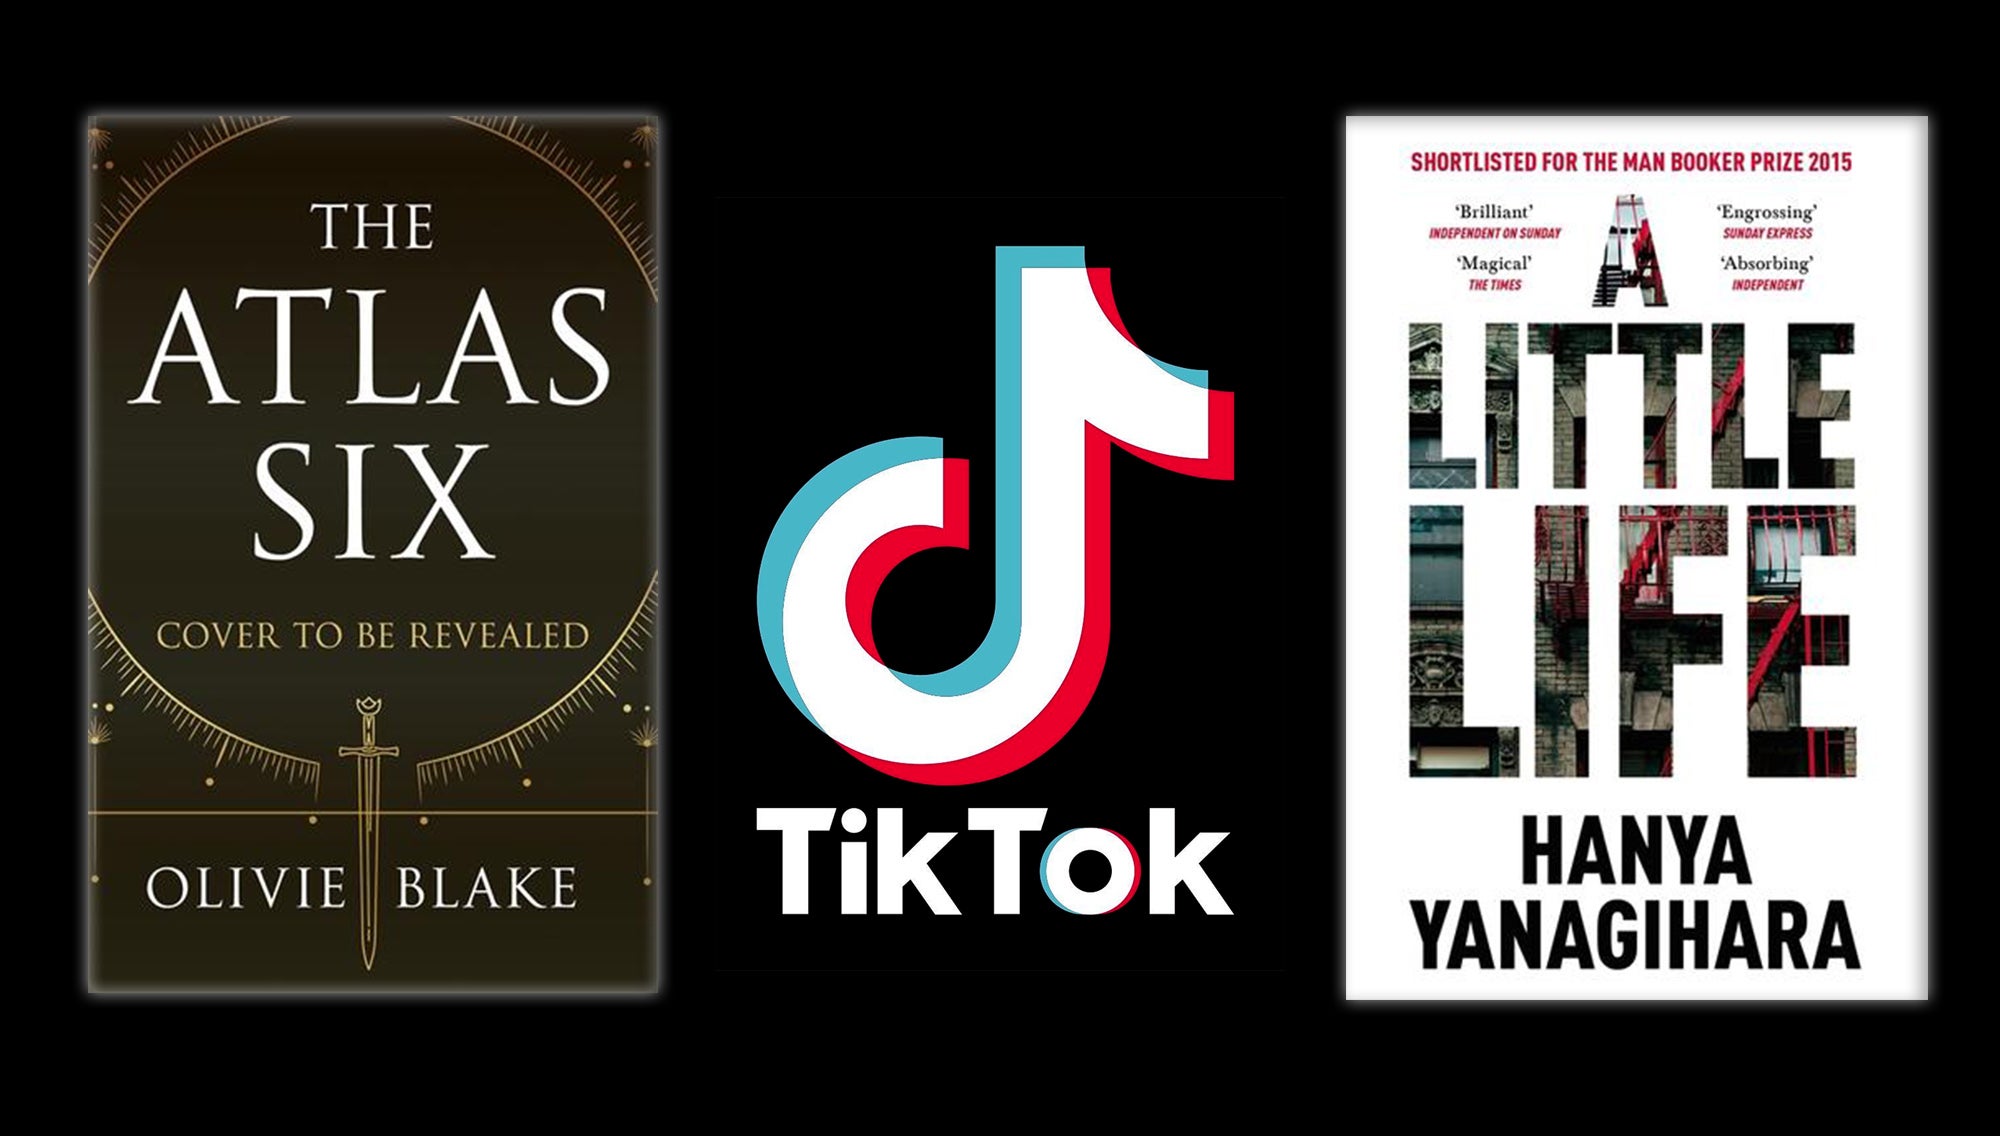 A picture of The Atlas Six and A Little Life next to the TikTok logo